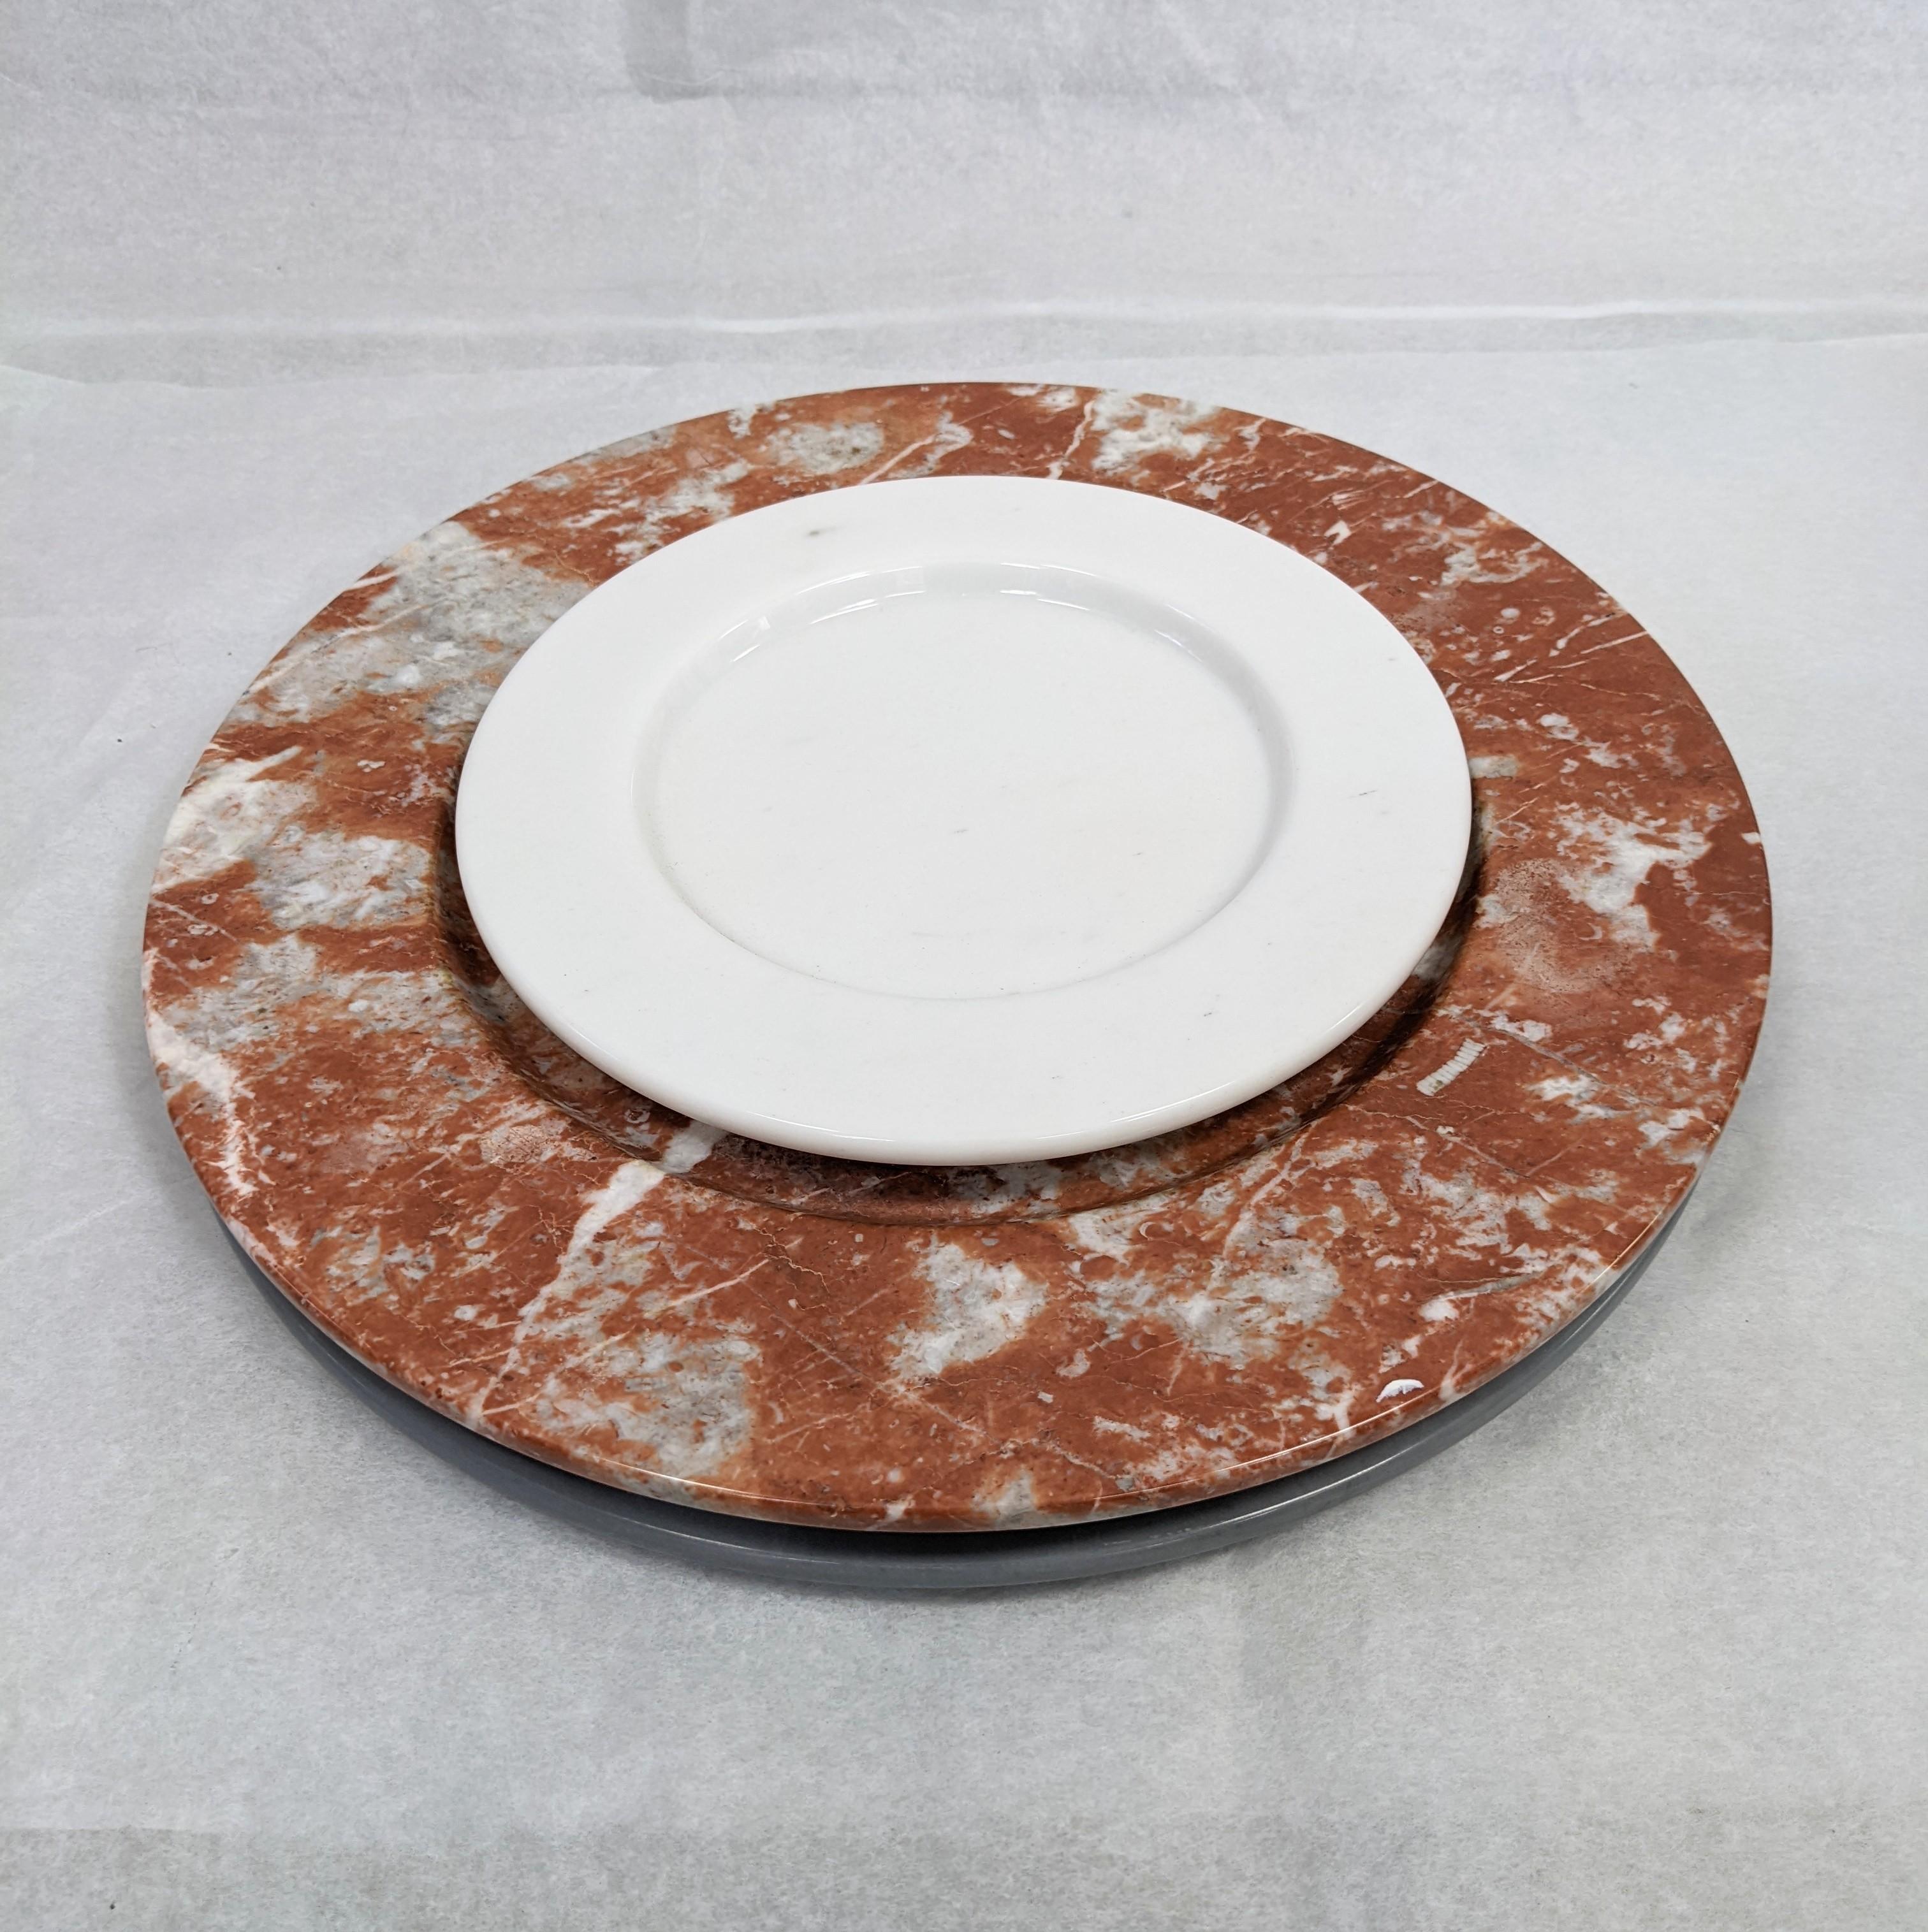 Set of 3 decorative marble charger plates from the 1980's Italy in mottled red, grey and white. Large centerpieces are 13